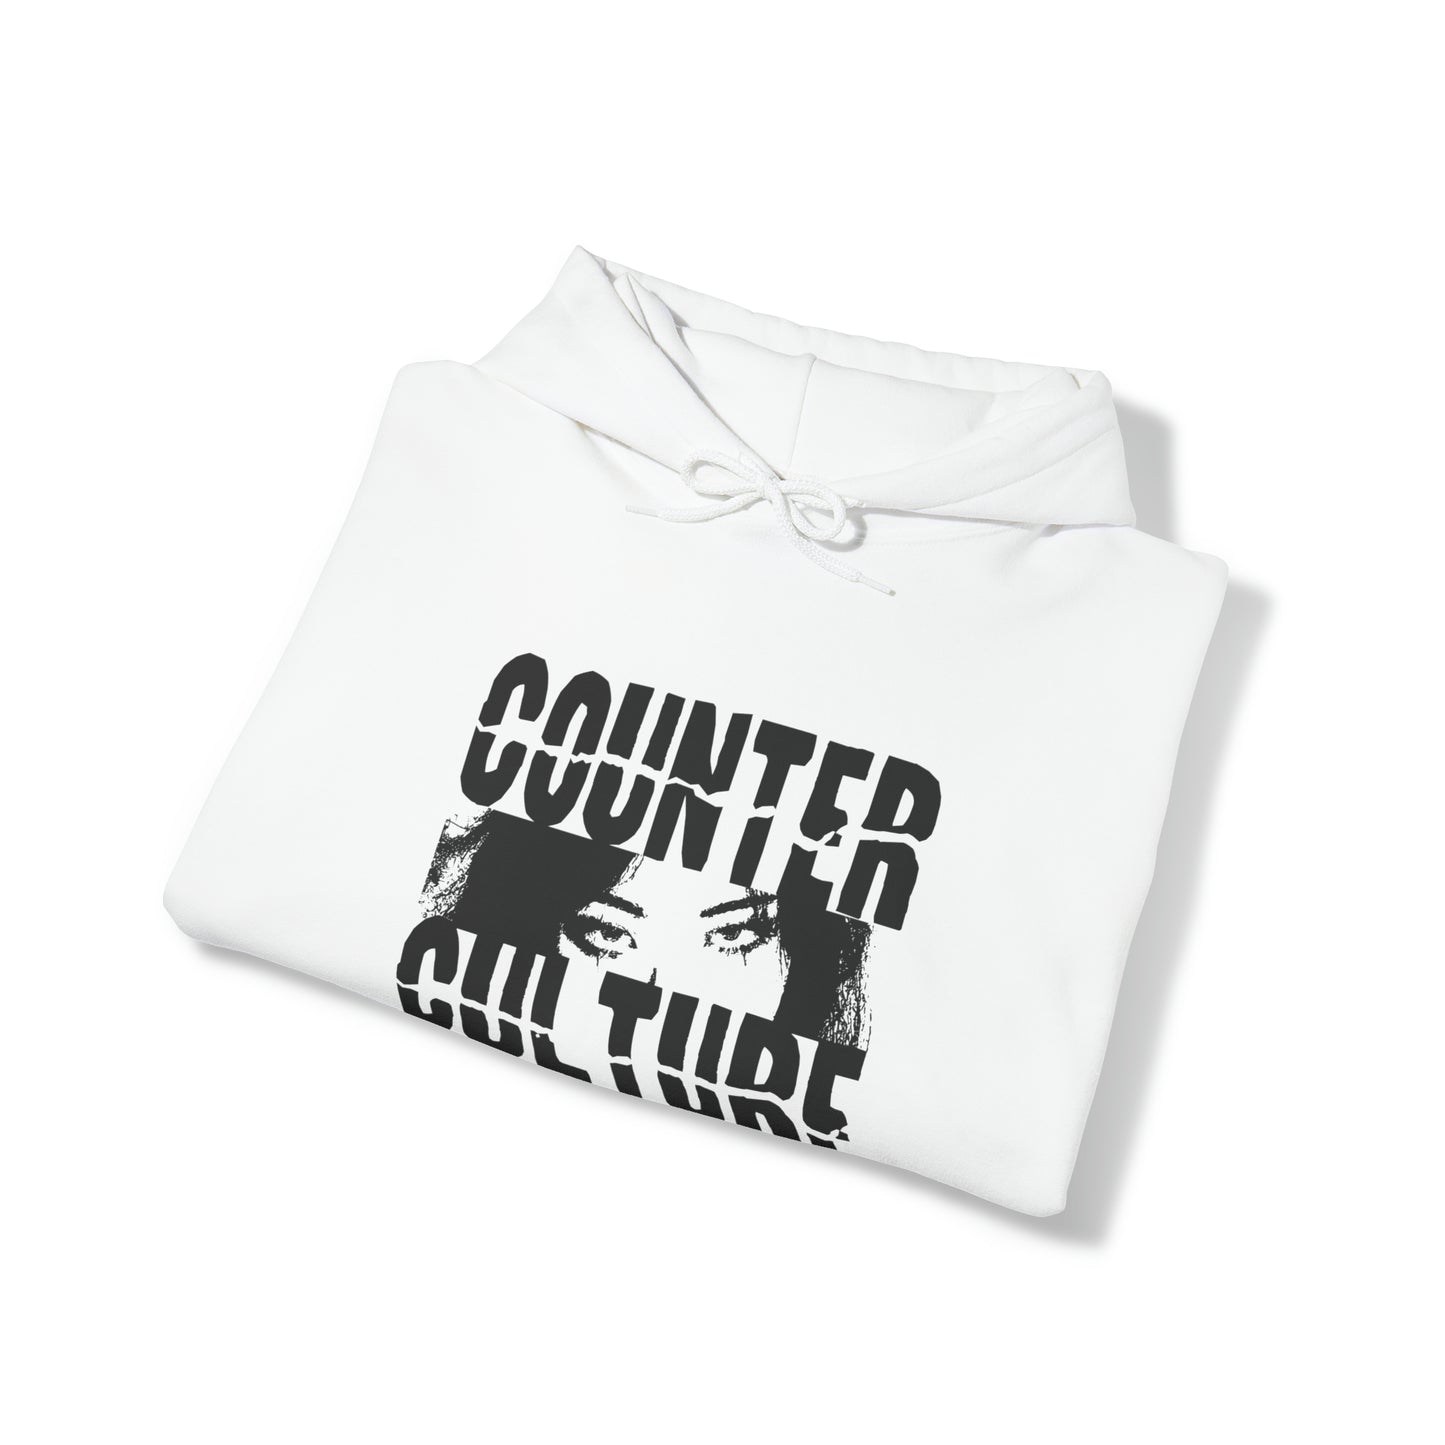 Counter Culture Unisex Heavy Blend Hoodie